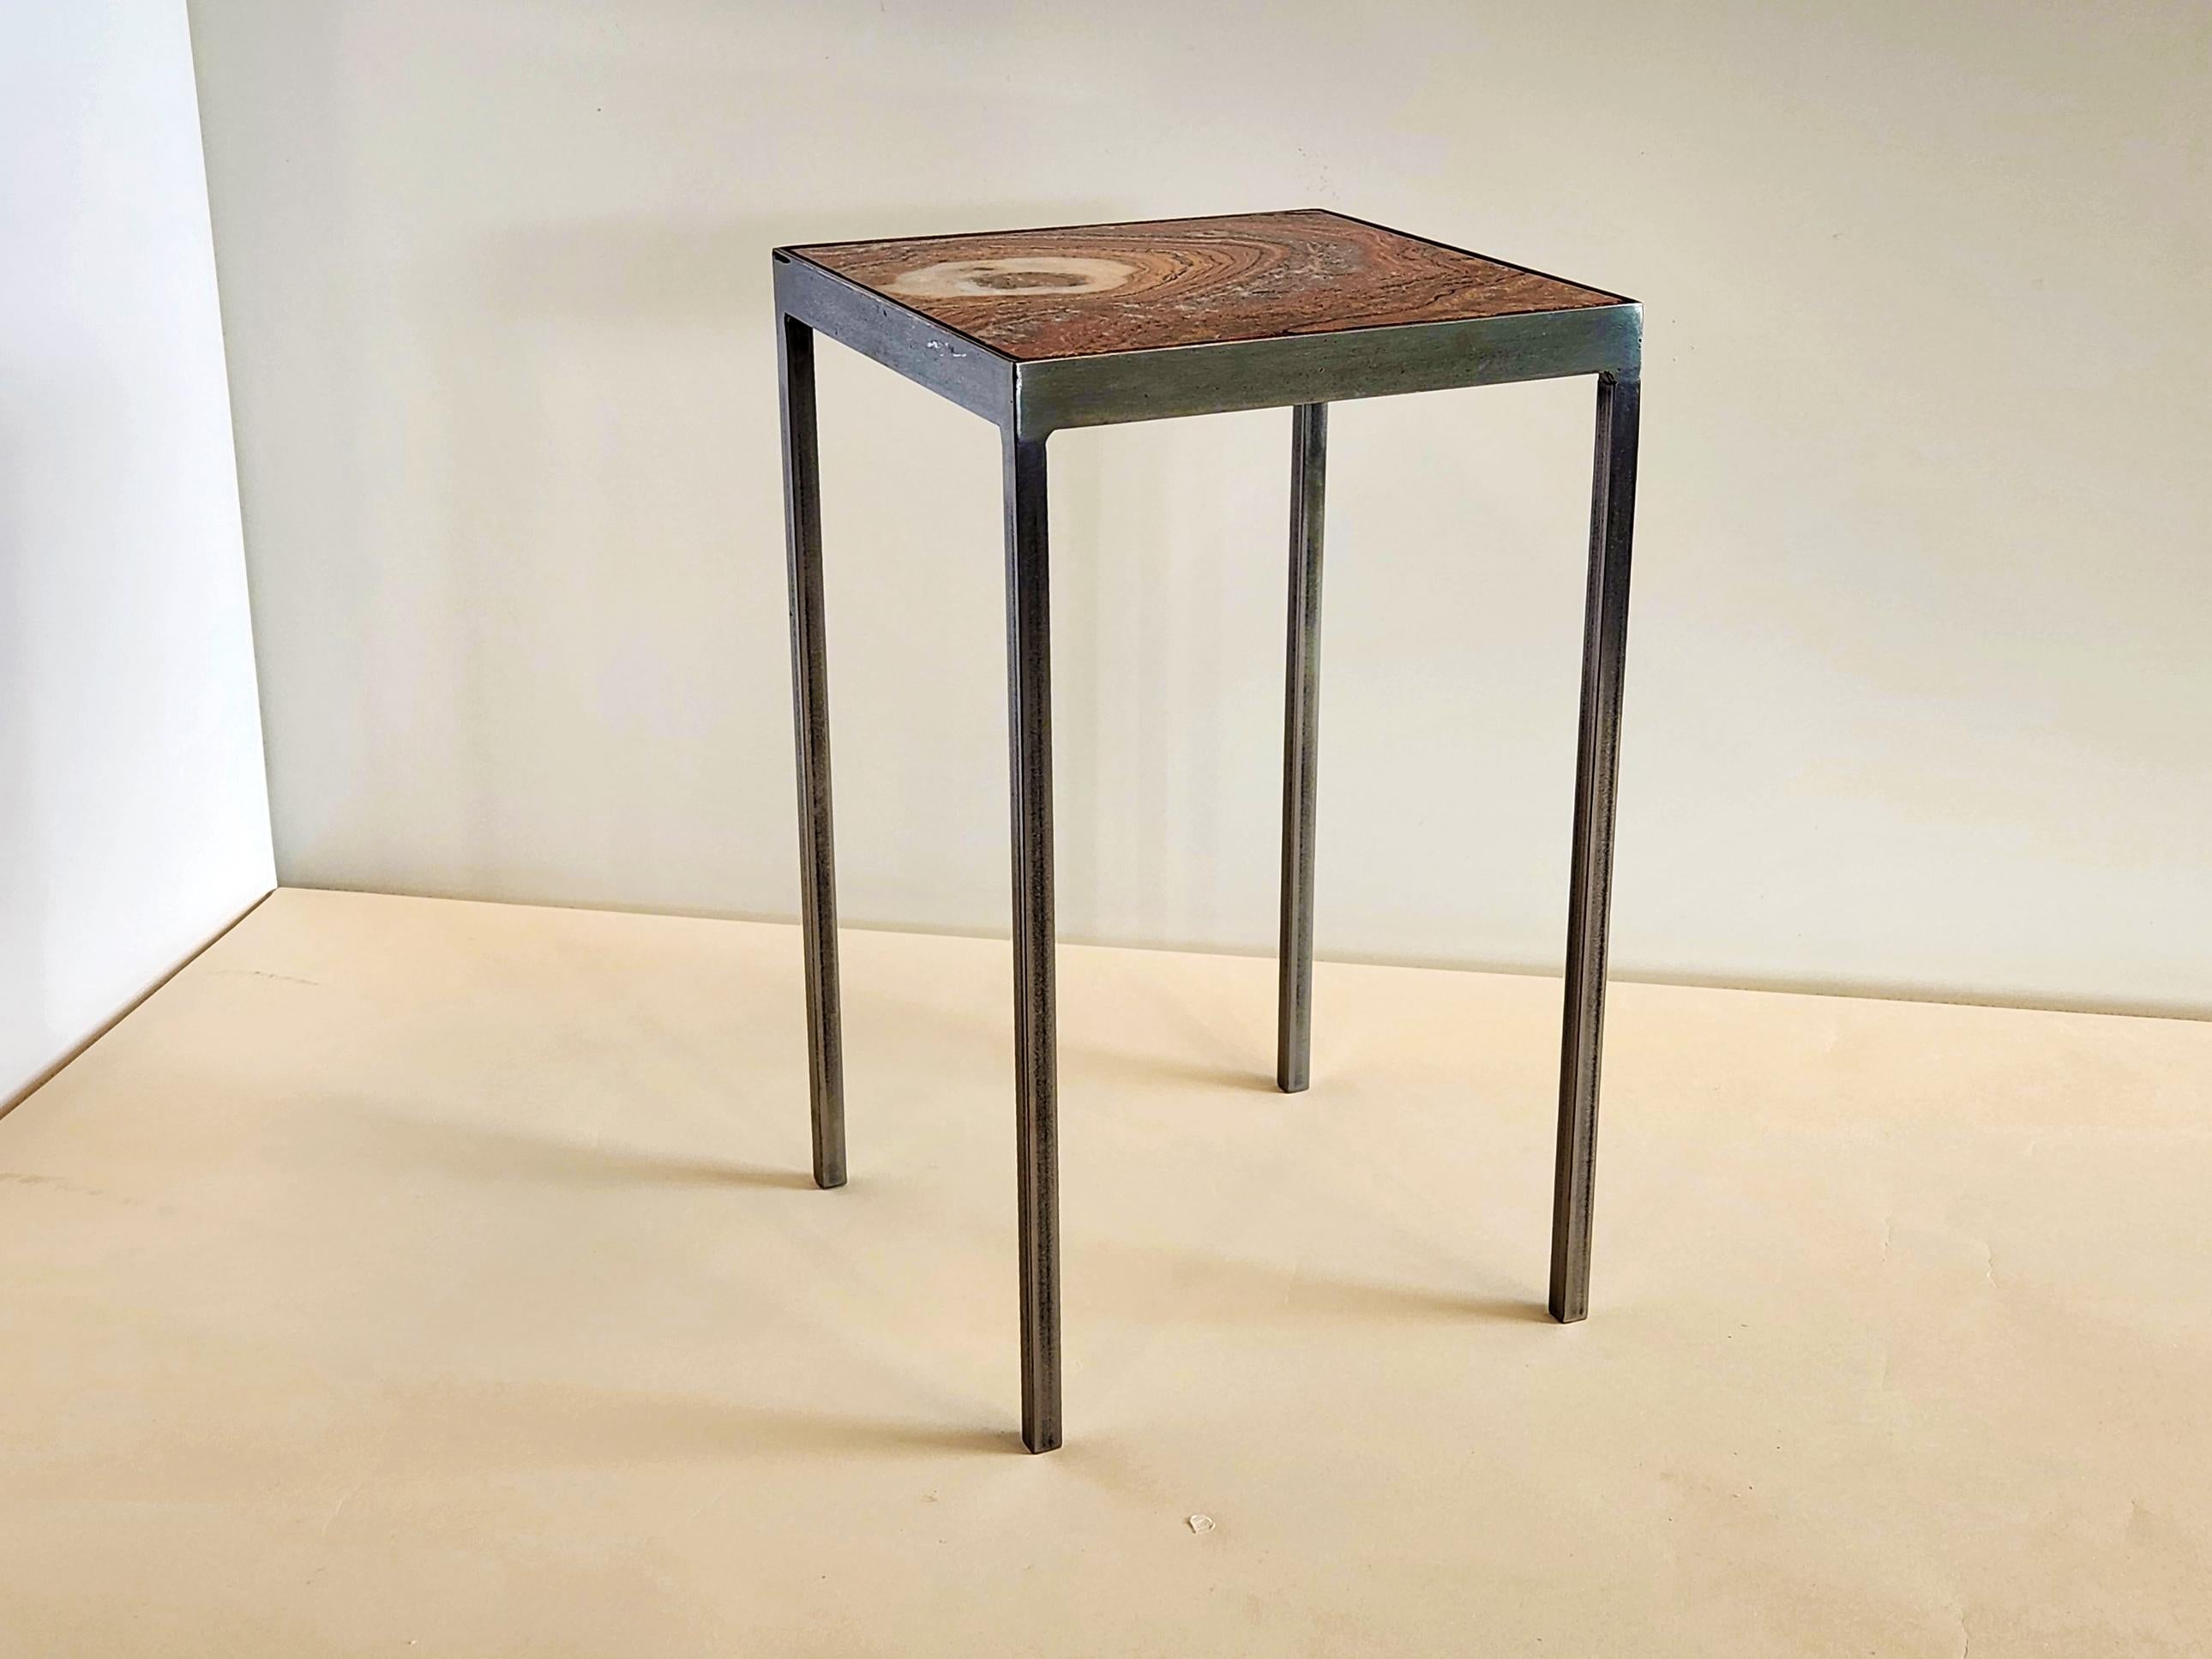 Onyx stone cut from a rare red slab showing many layers of colored sediments naturally created over millions of years by Mother Earth. The stone is set in a steel frame similar to our baby side tables with Capron tiles. With a 10